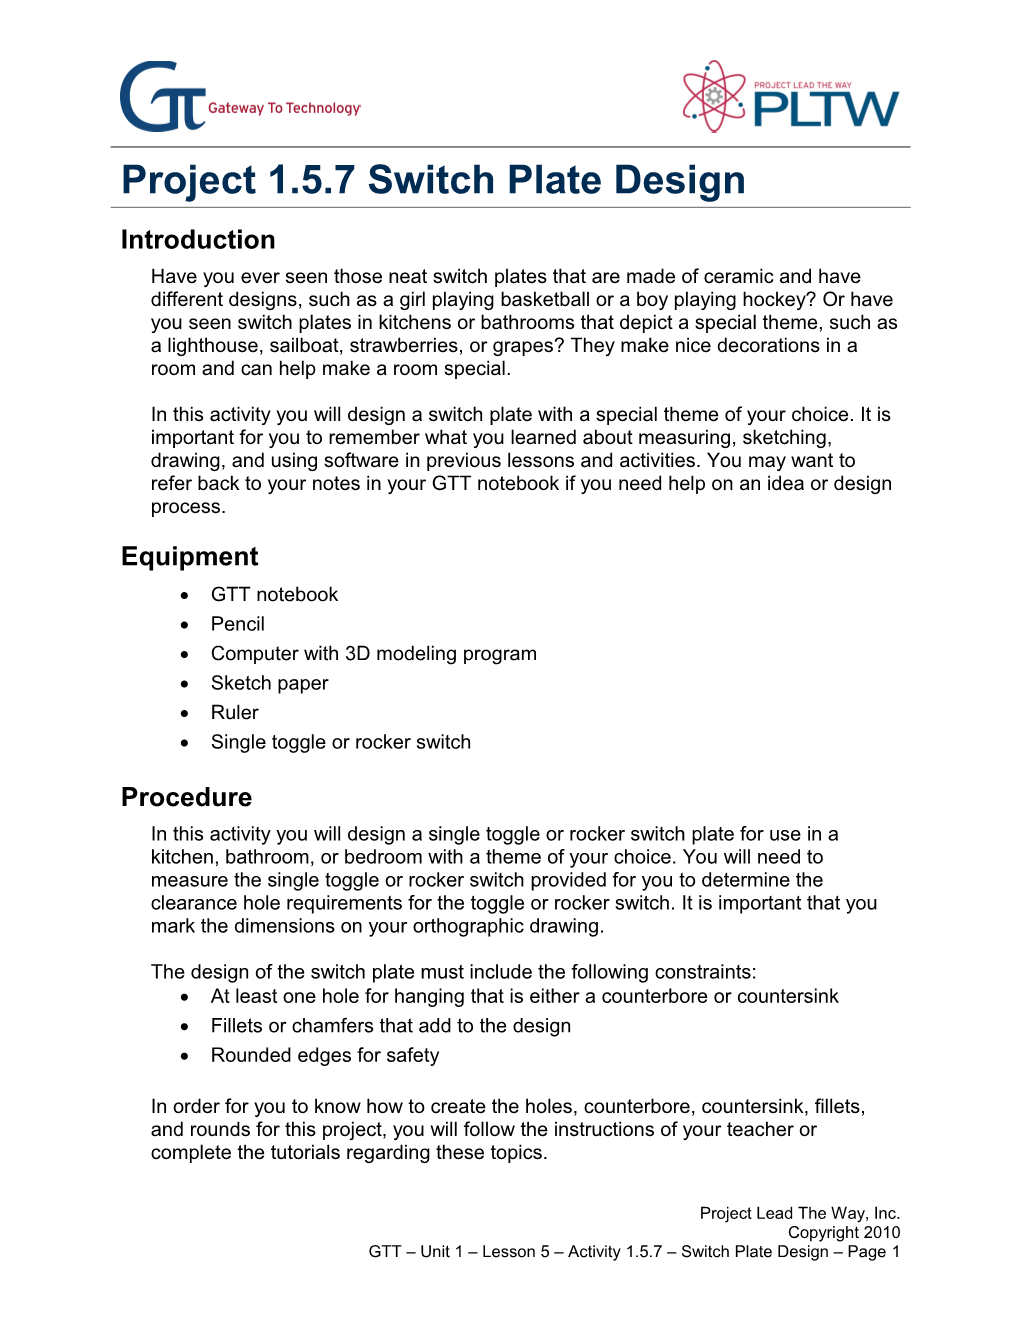 Activity 1.5.7 Switch Plate Design